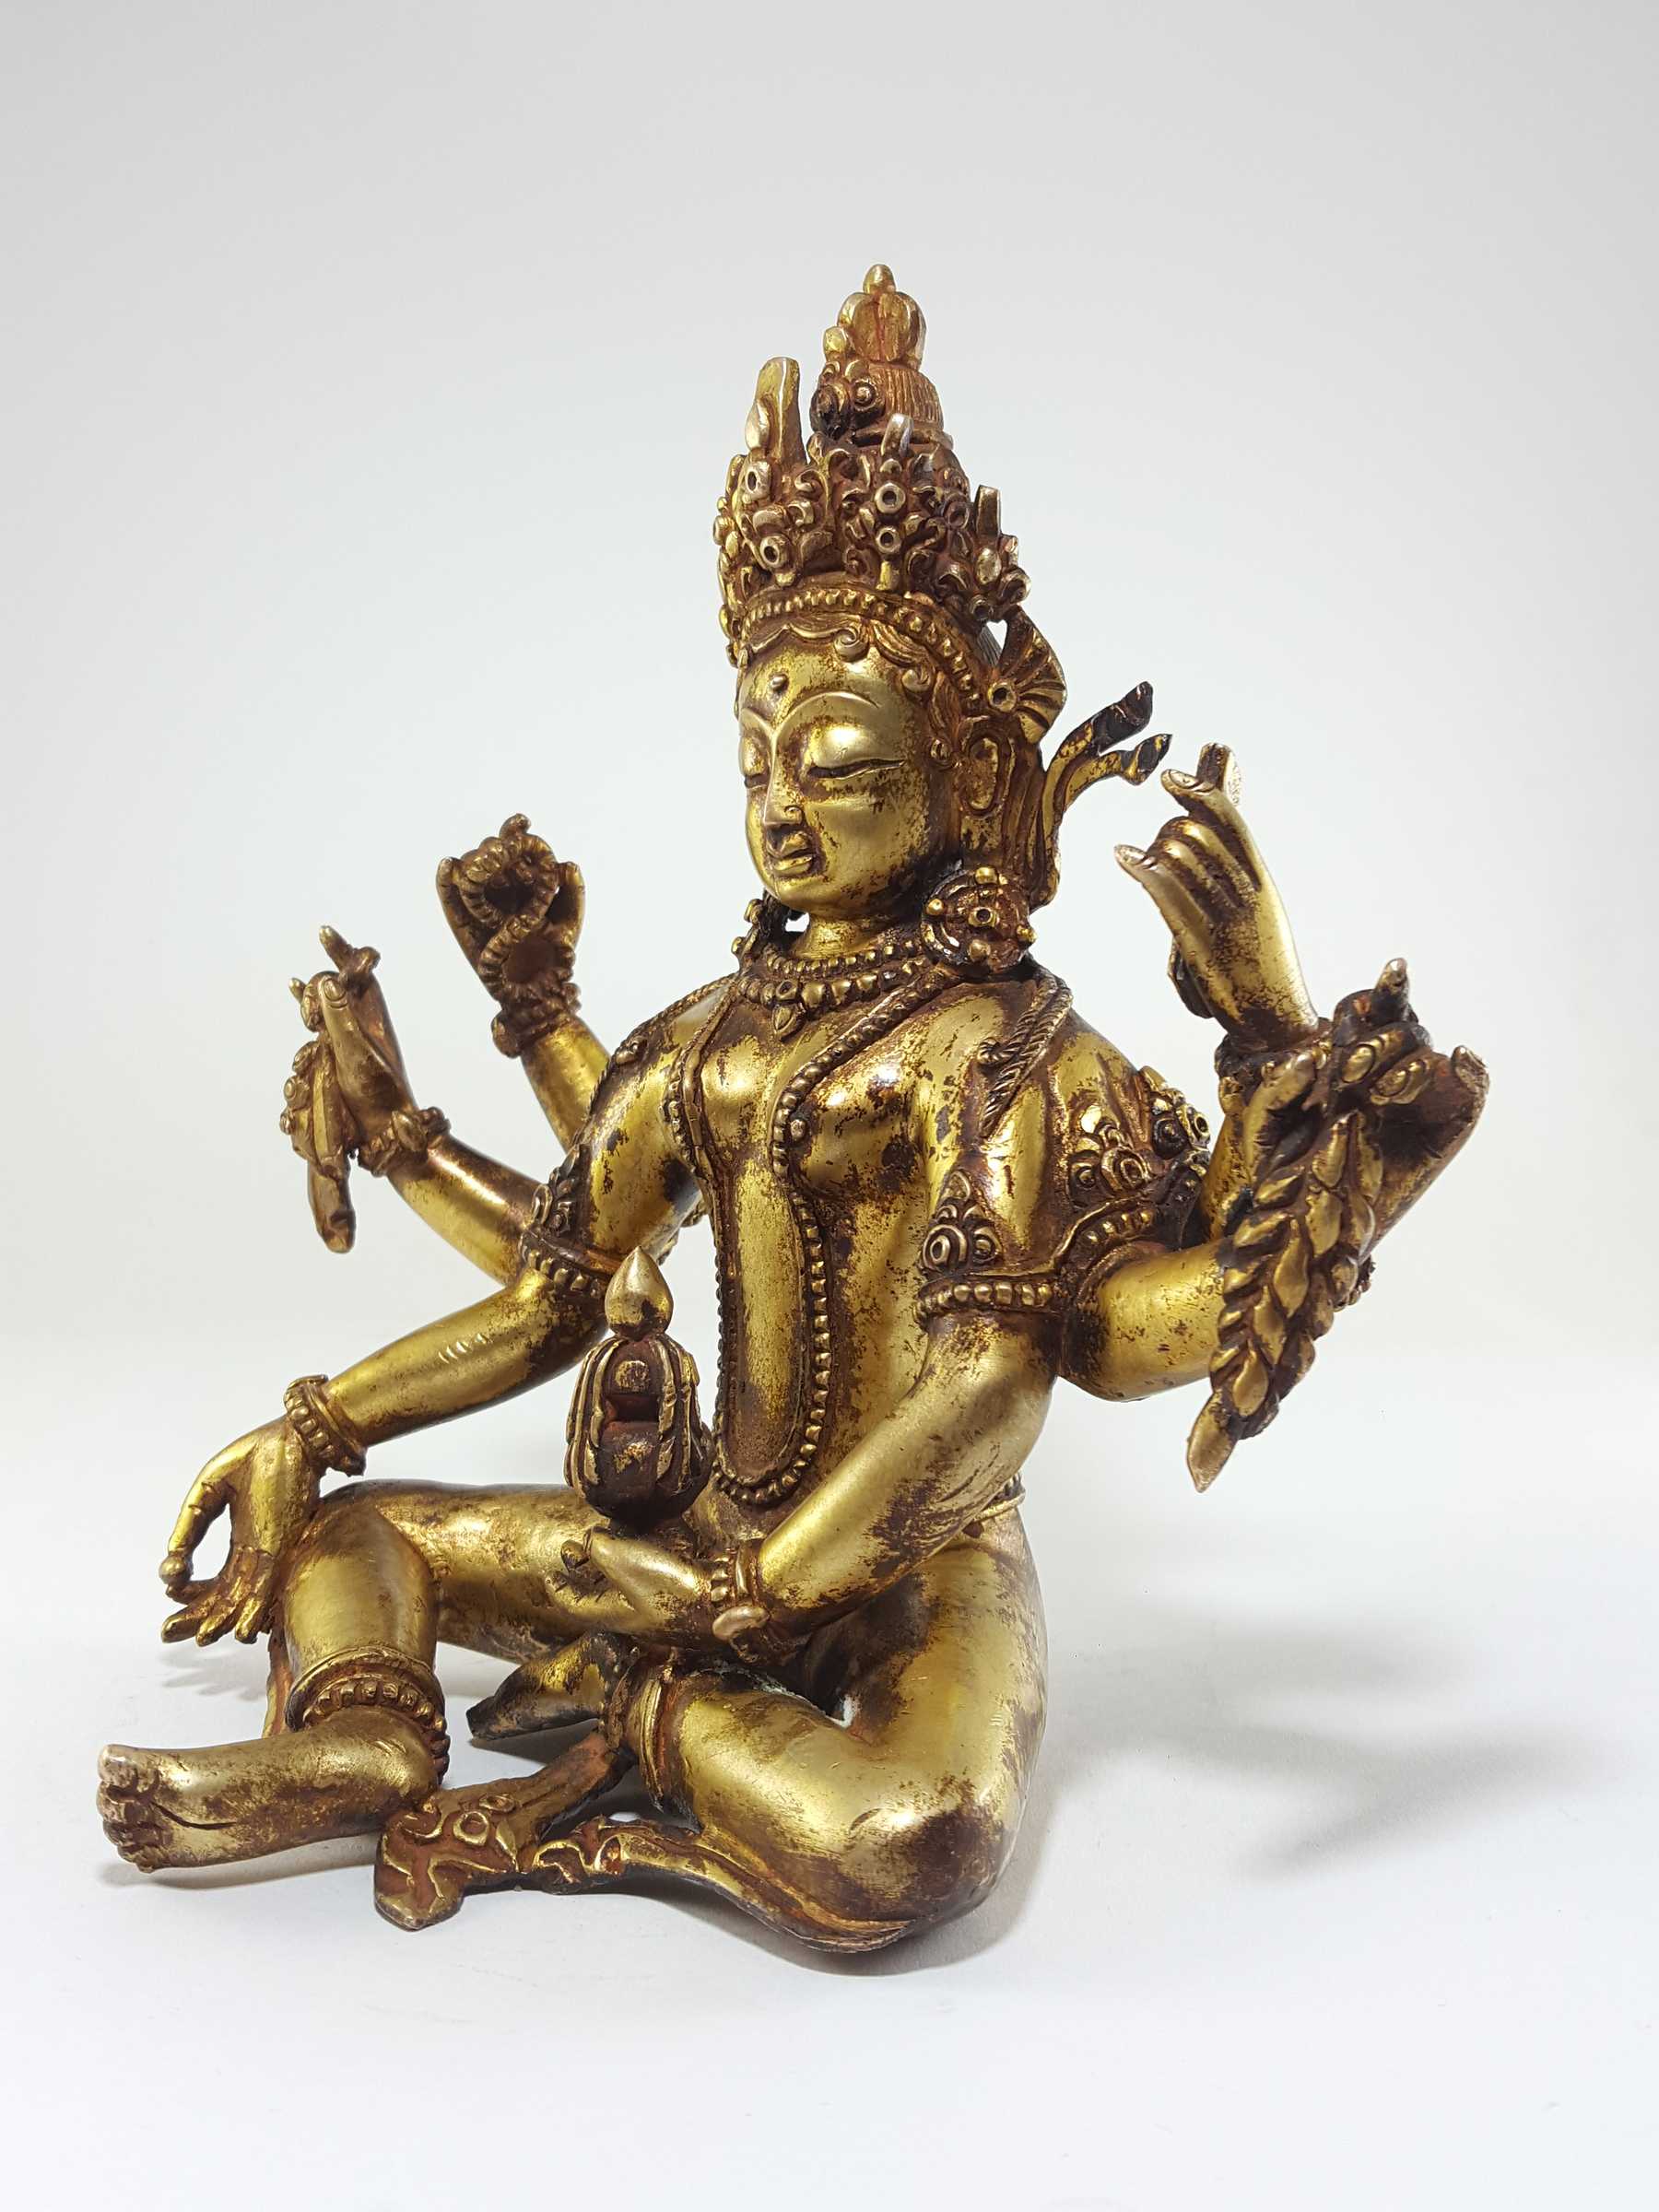 Vasudhara master Quality Statue full Gold Plated, antique Finishing, rare Find, remakable